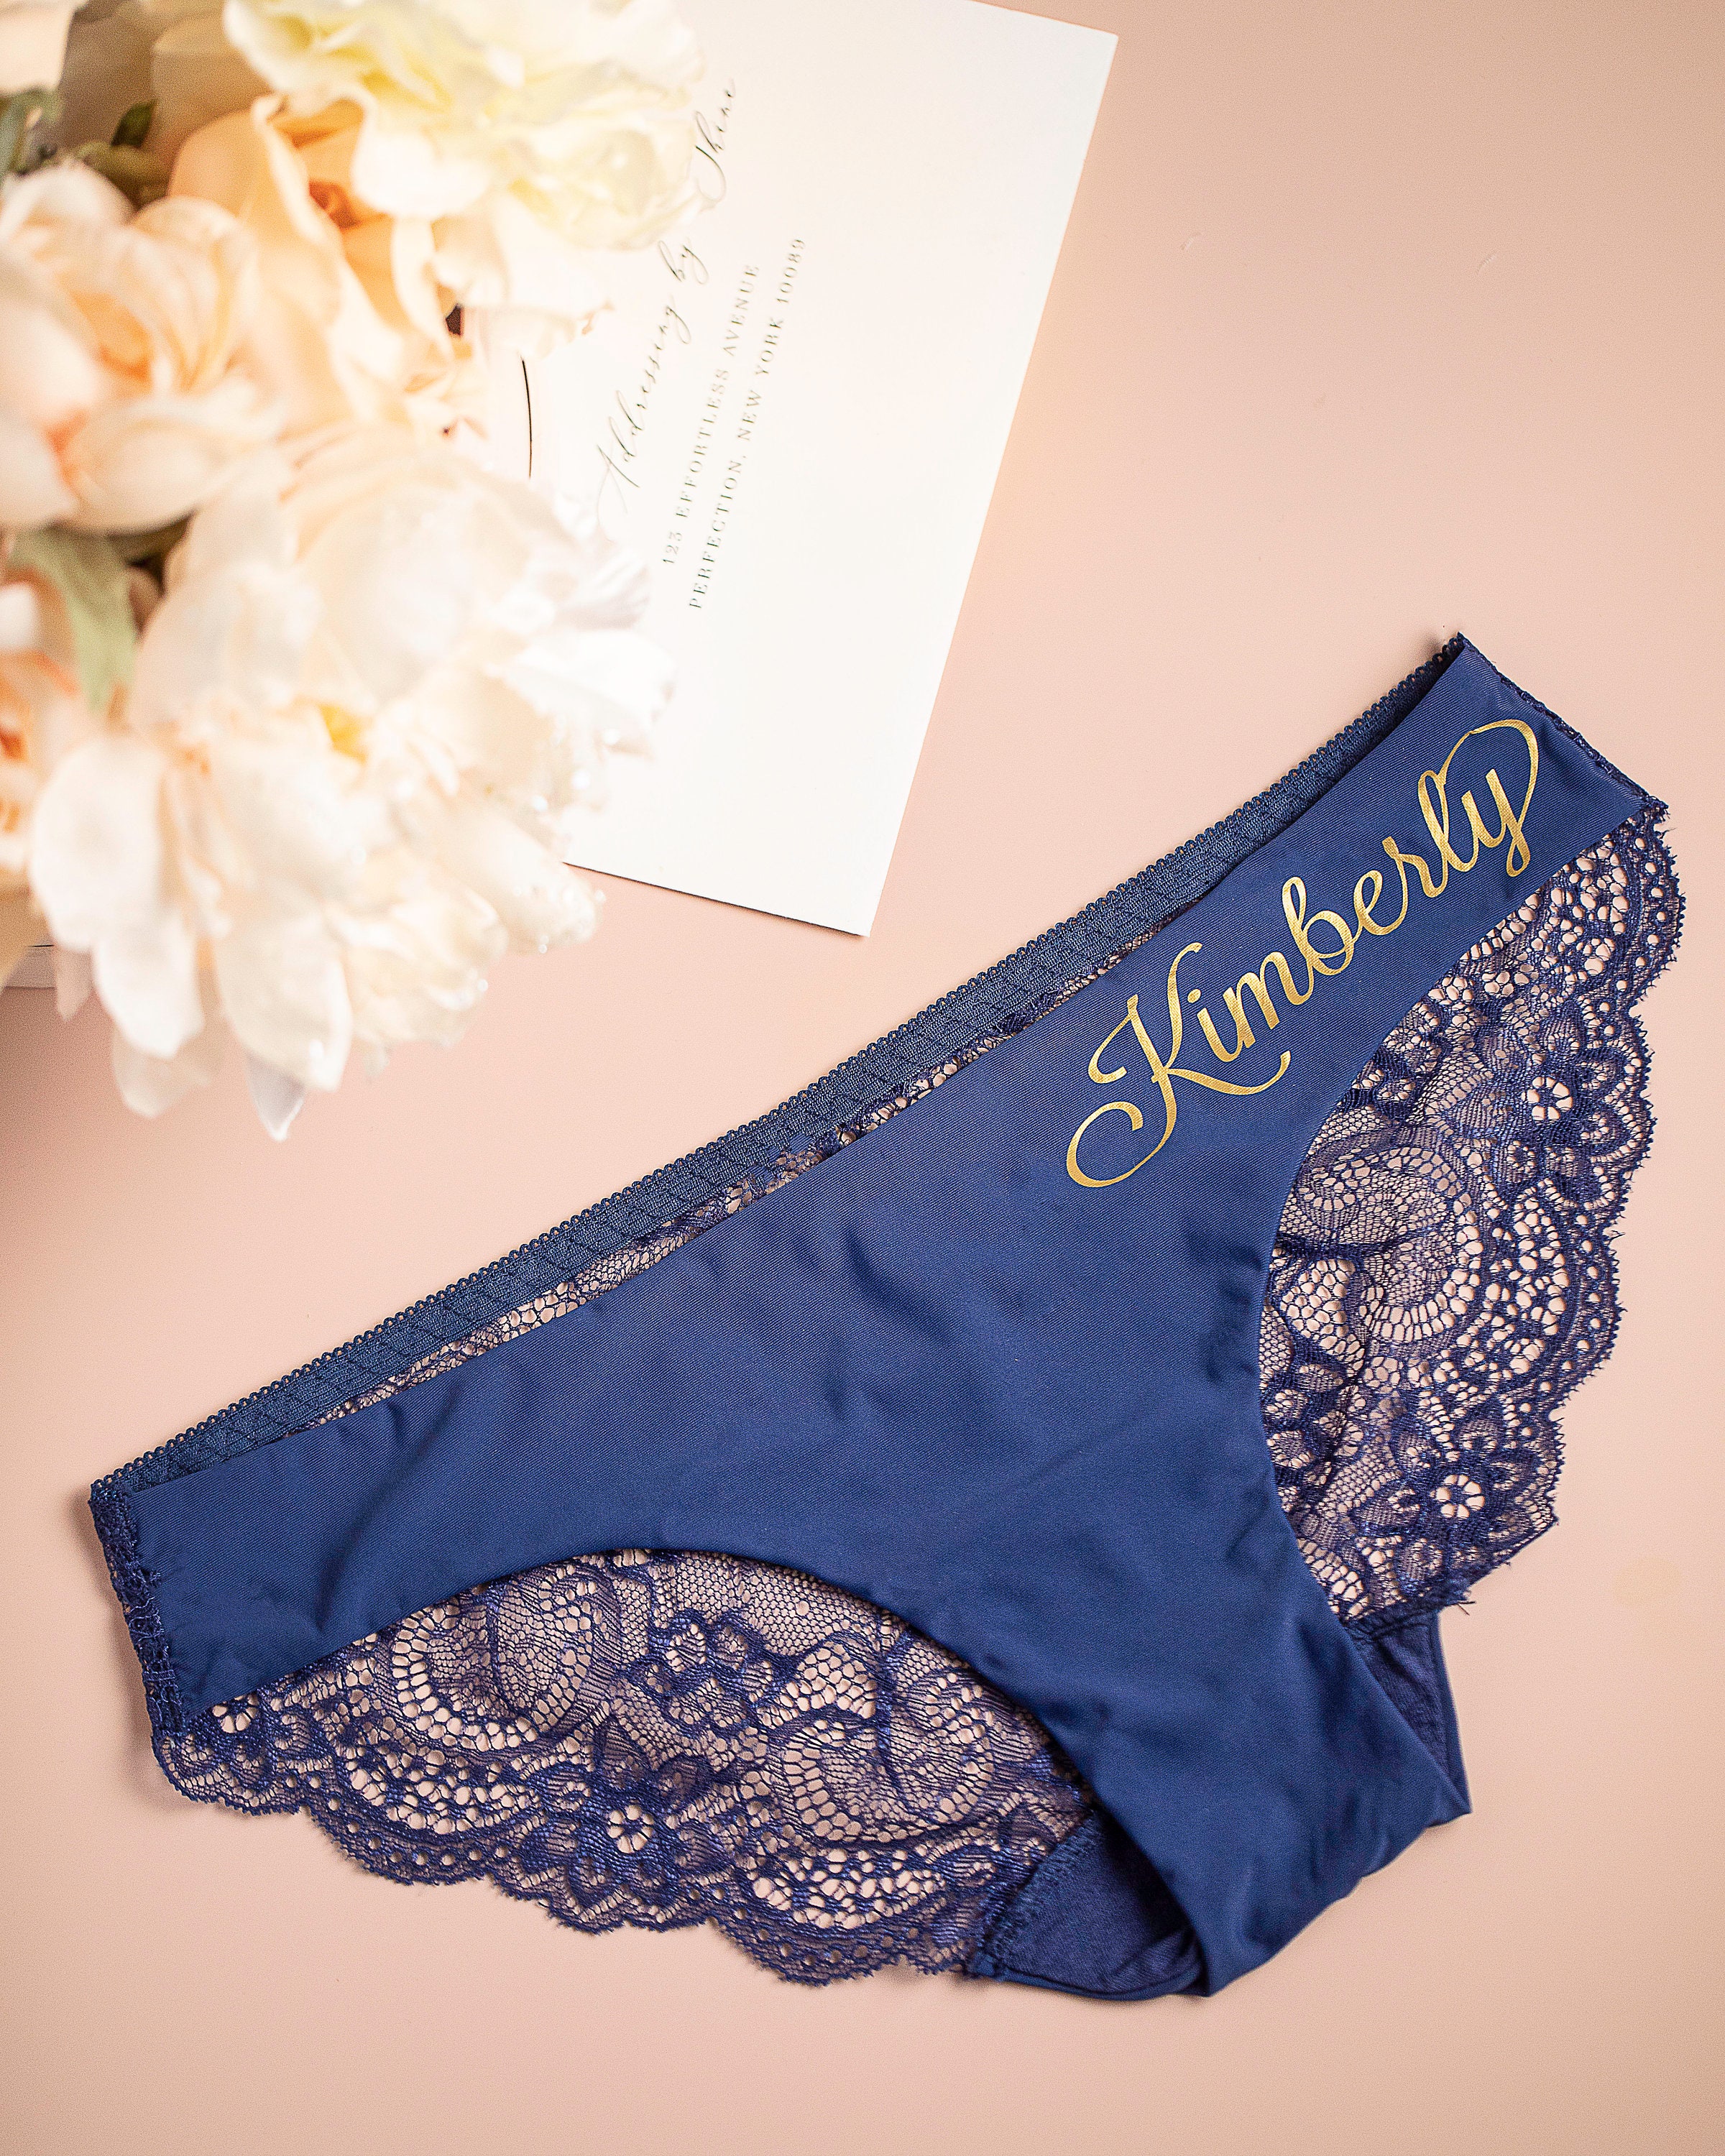 Gifts Custom Gifts for Her Bride Panties Lace Wedding Underwear Bridal  Shower Gift Mother's Day Personalized With Name Honeymoon Gifts 